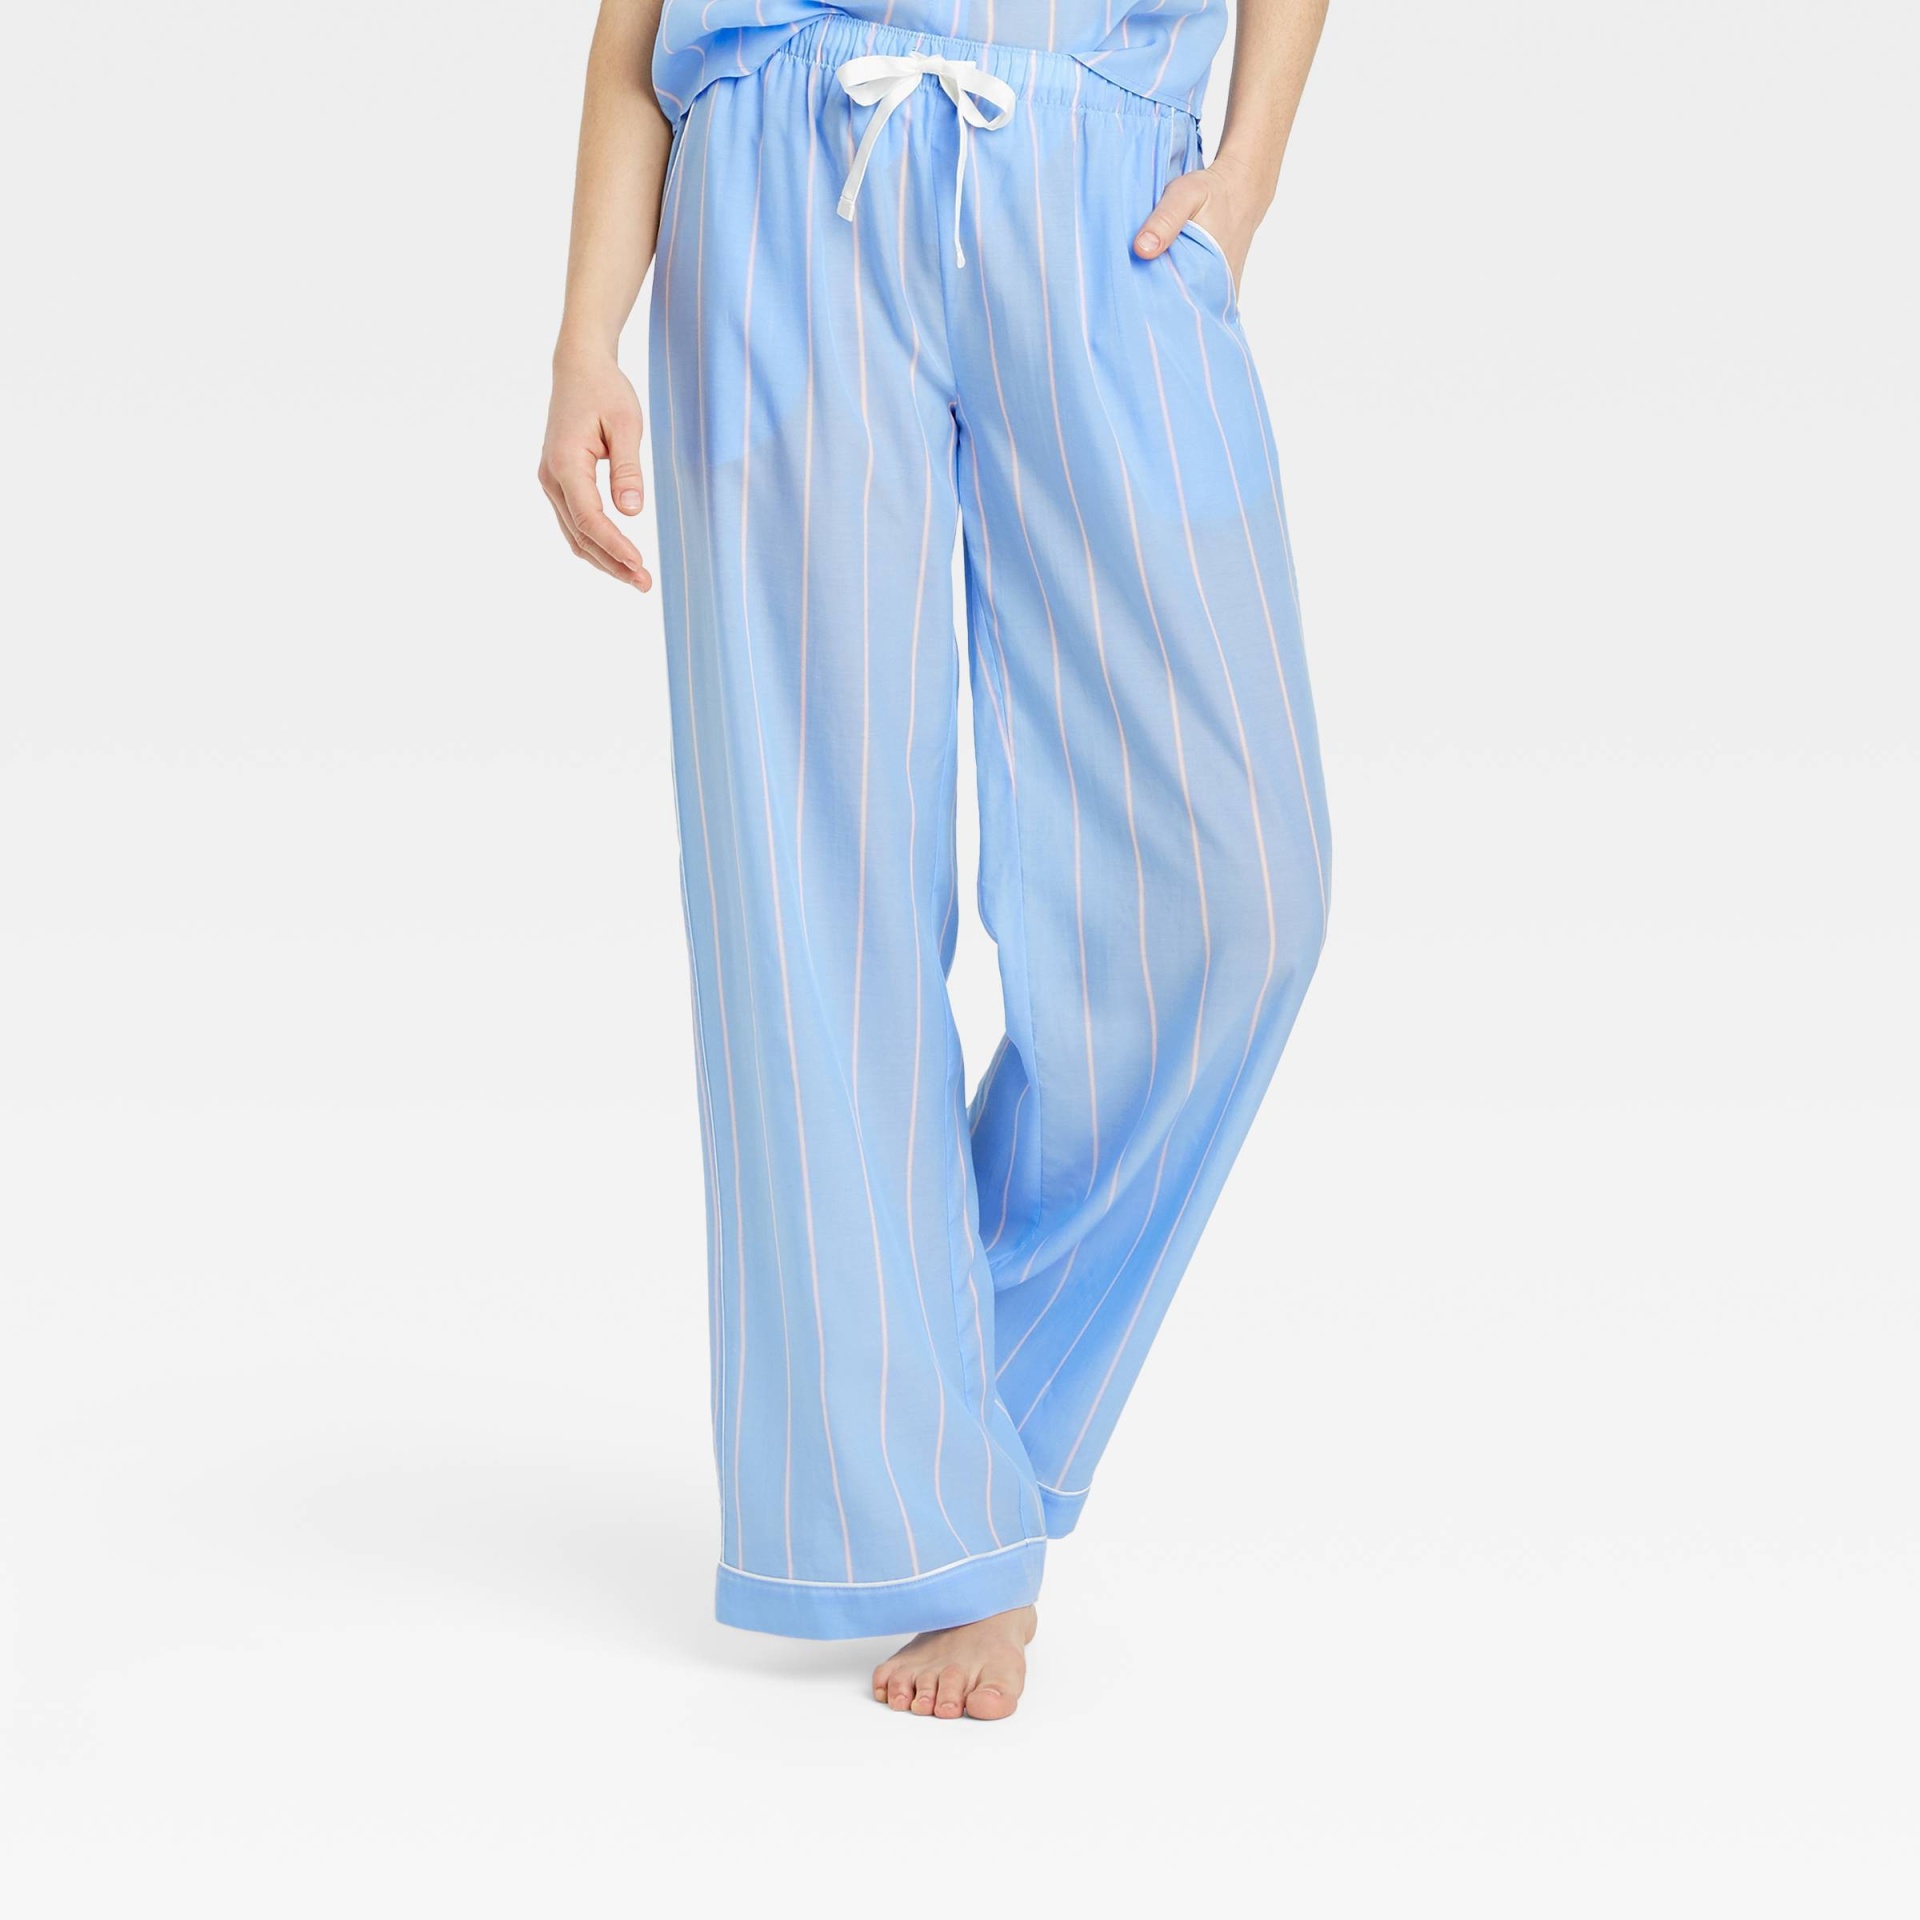 Women's Striped Simply Cool Pajama Pants - Stars Above Blue XL 1 ct